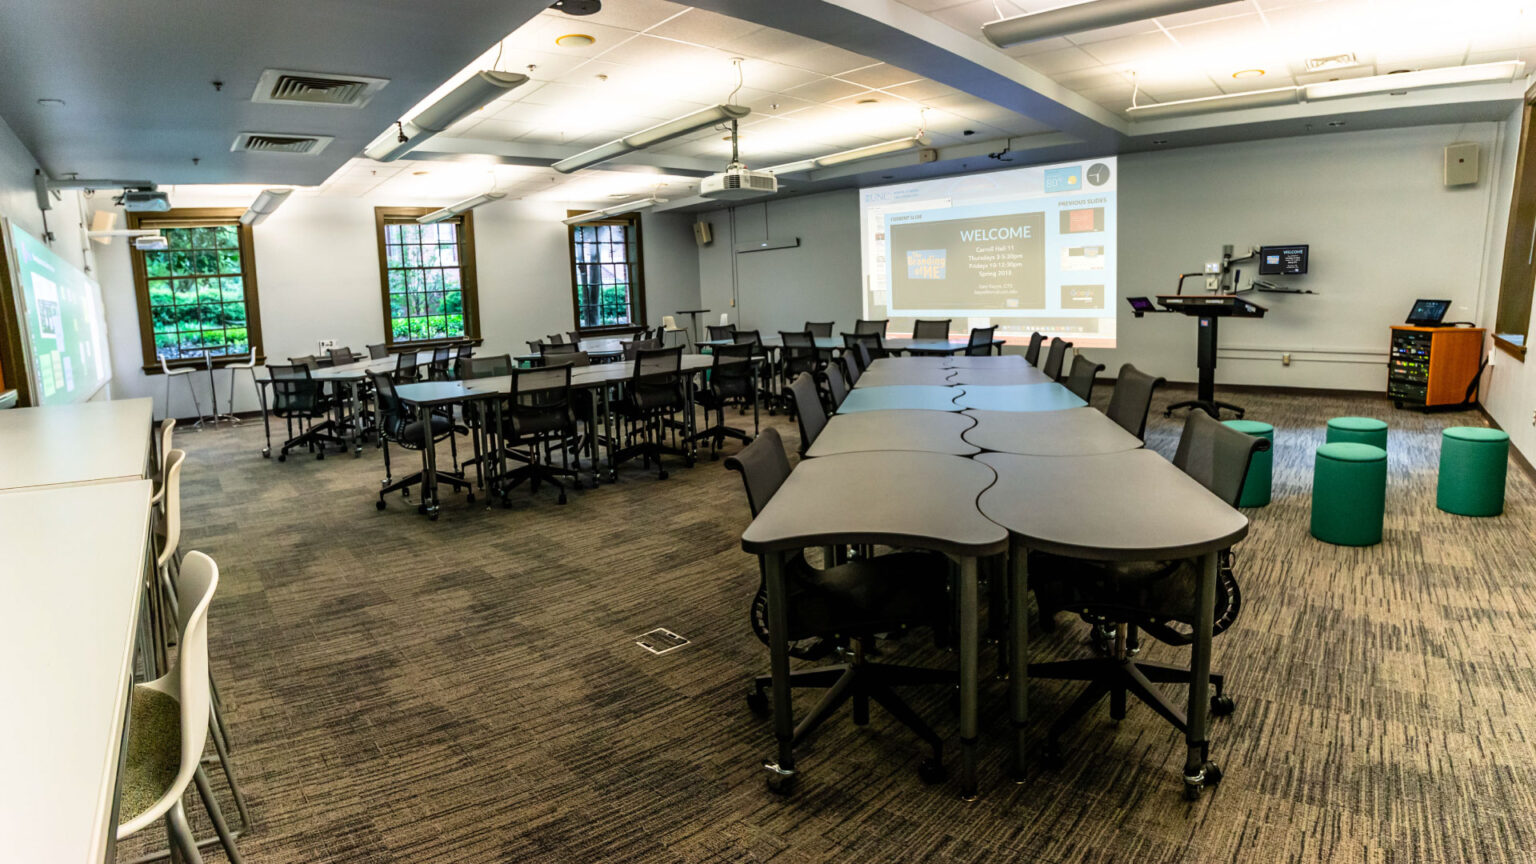 Interior of a classroom with projector, lectern, AV stand, and many modular student desks. 